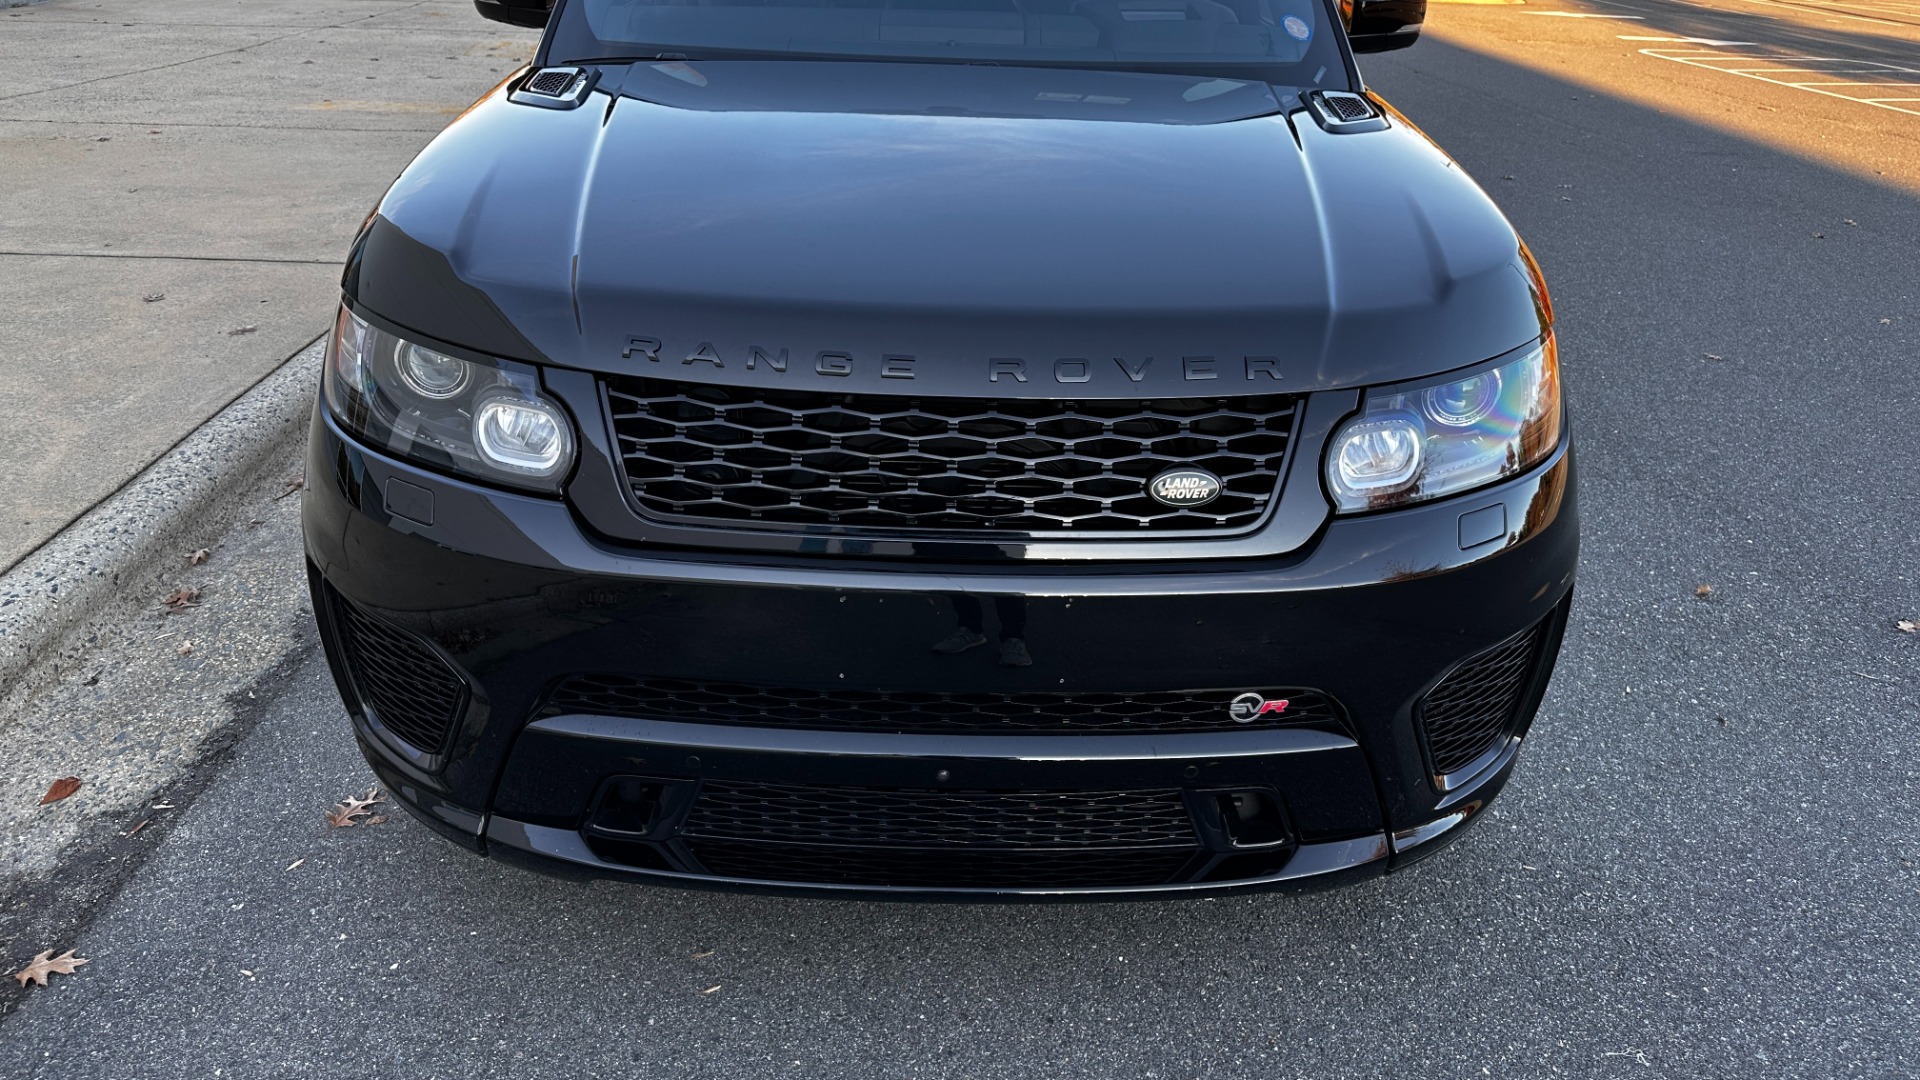 Used 2017 Land Rover Range Rover Sport SVR / DRIVE PRO PACKAGE / MERIDIAN SURROUND SOUND / SUPERCHARGED V8 / PANOR for sale $63,999 at Formula Imports in Charlotte NC 28227 8